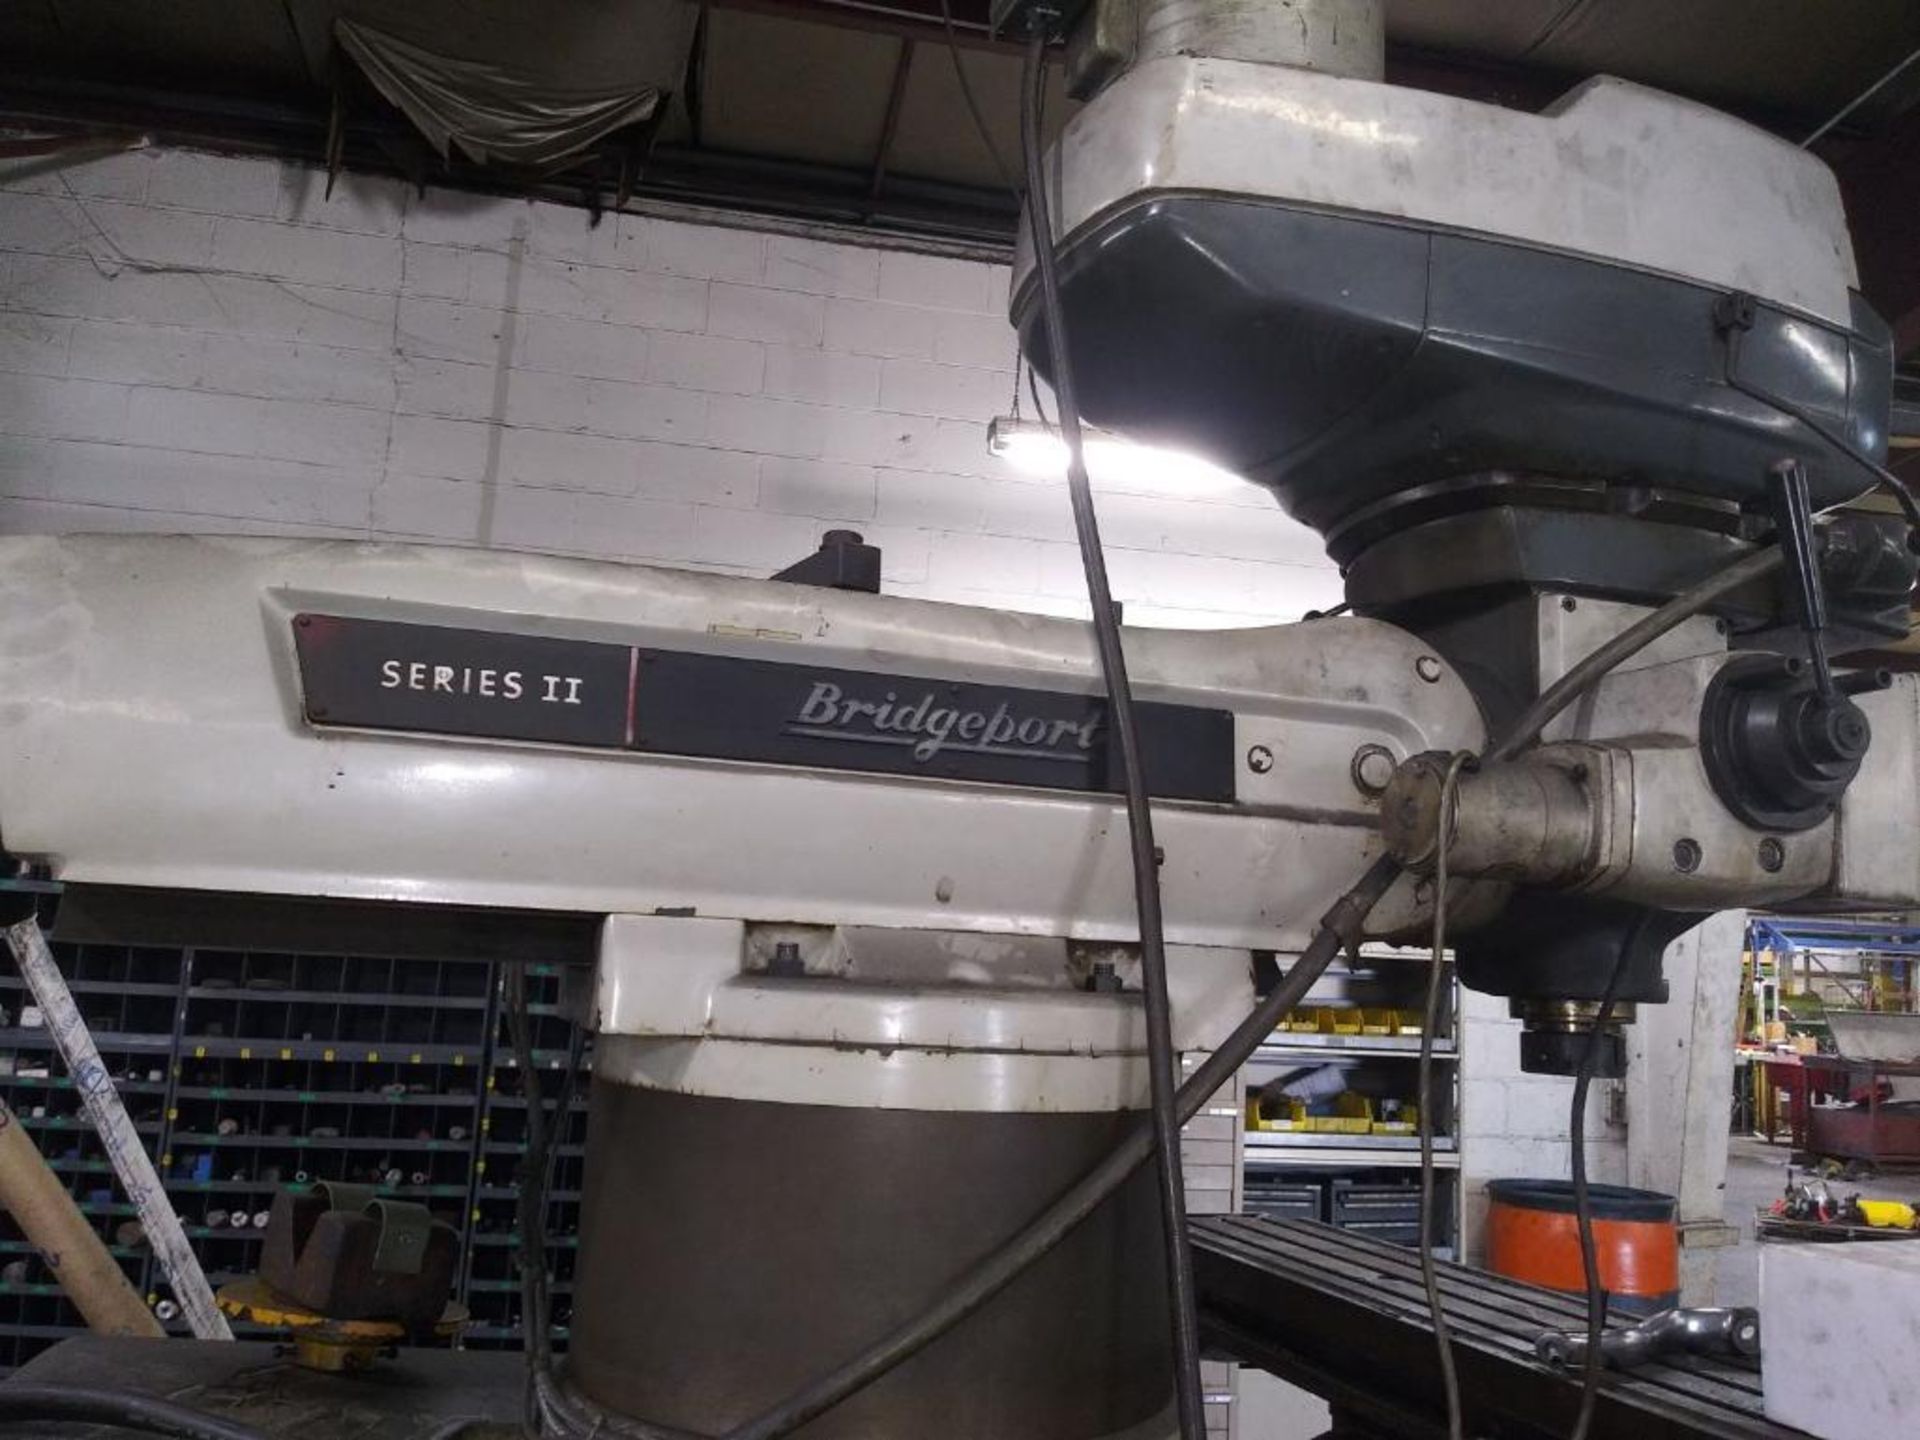 Bridgeport Series II Textron Milling Machine (Located at 2201 Hwy 31 SW, Hartselle, AL 35640) - Image 3 of 4